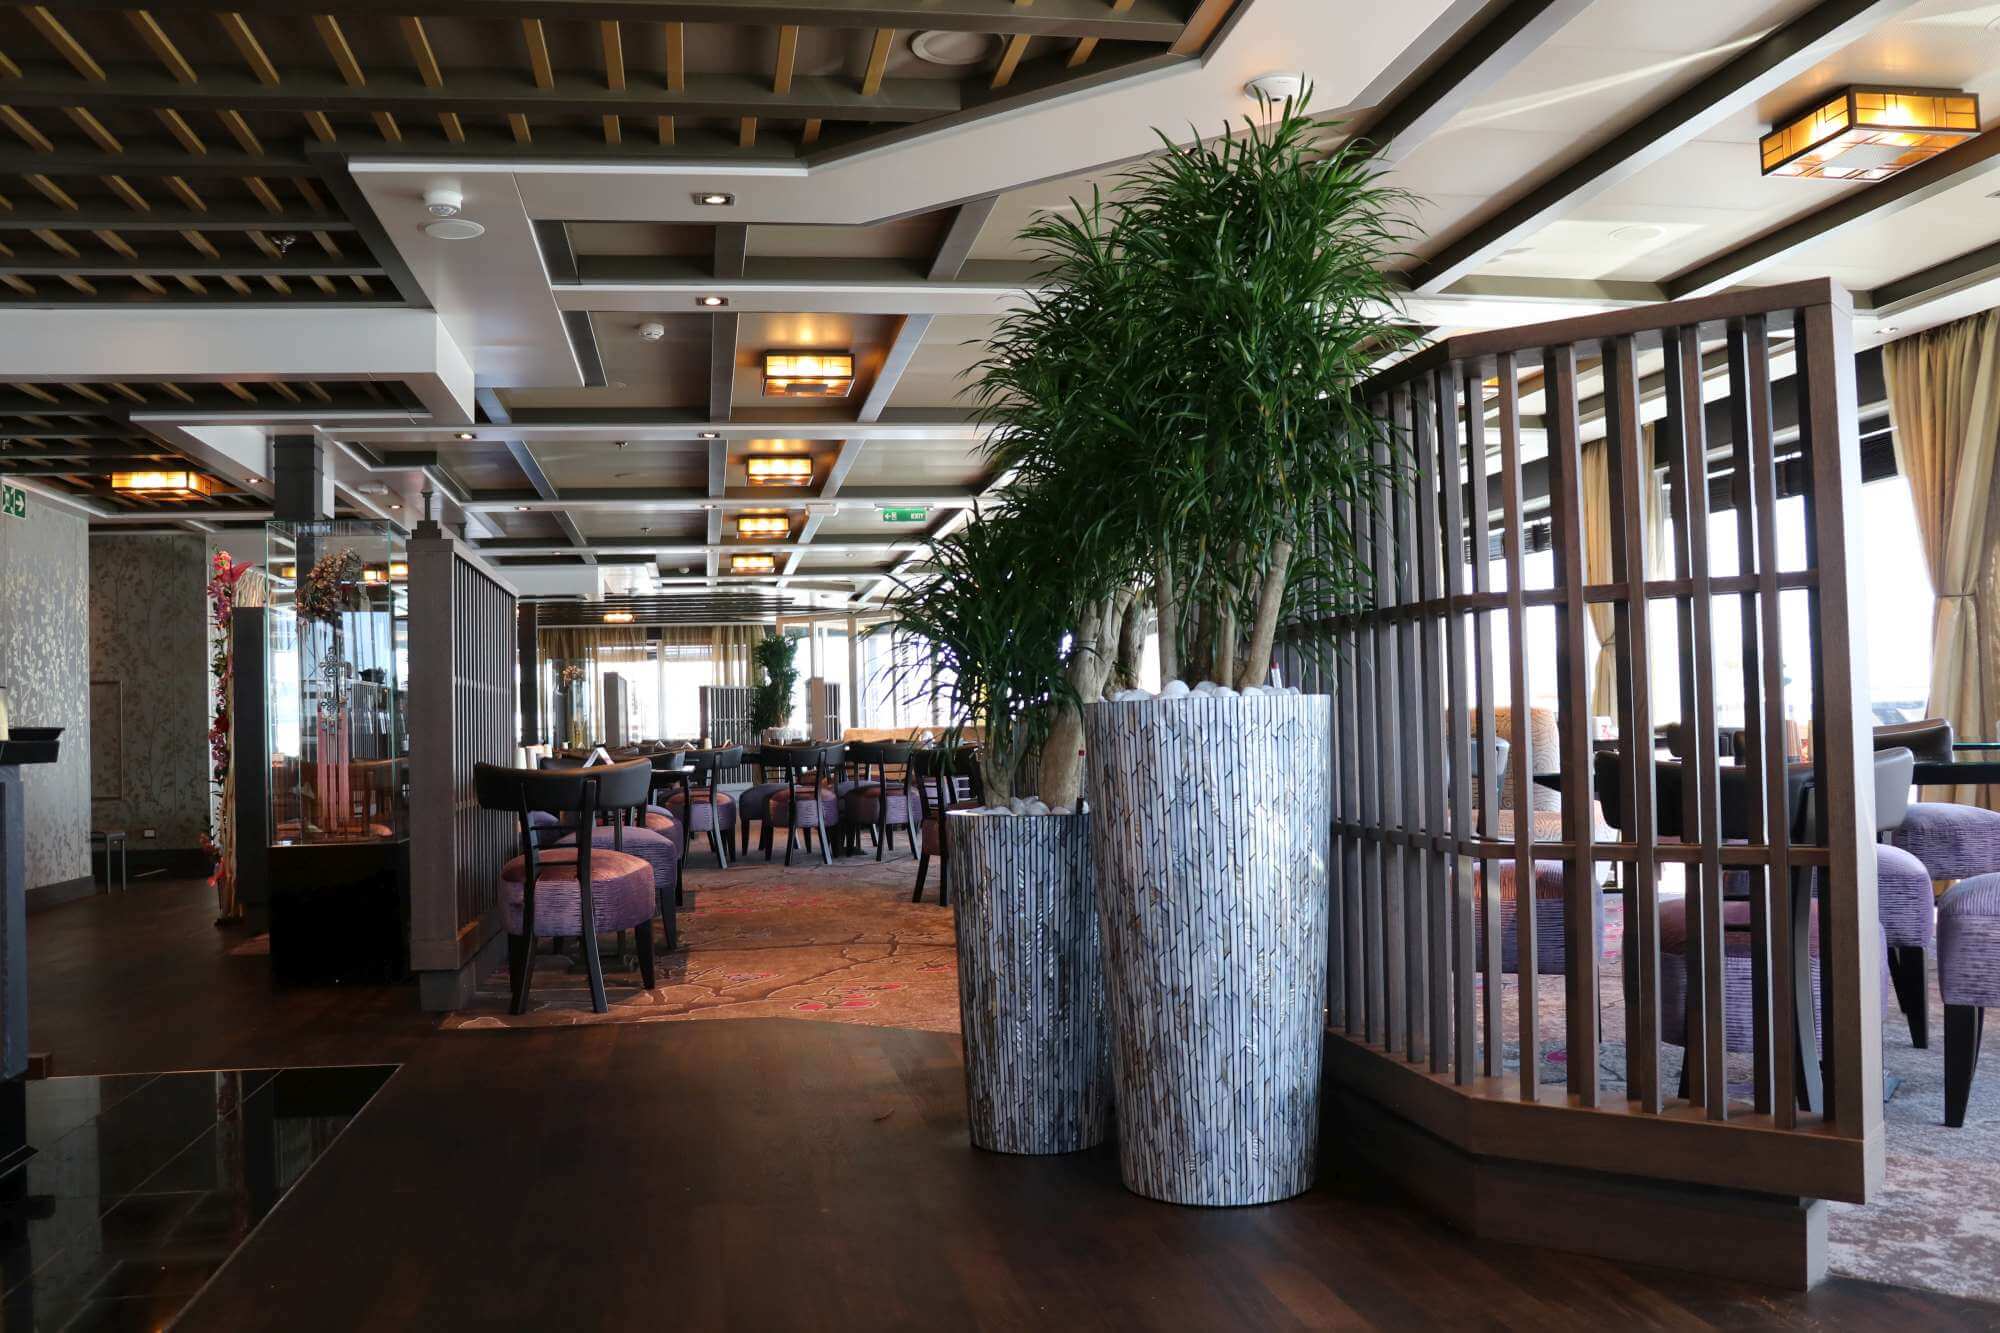 Large plants in a restaurant onboard a cruise ship